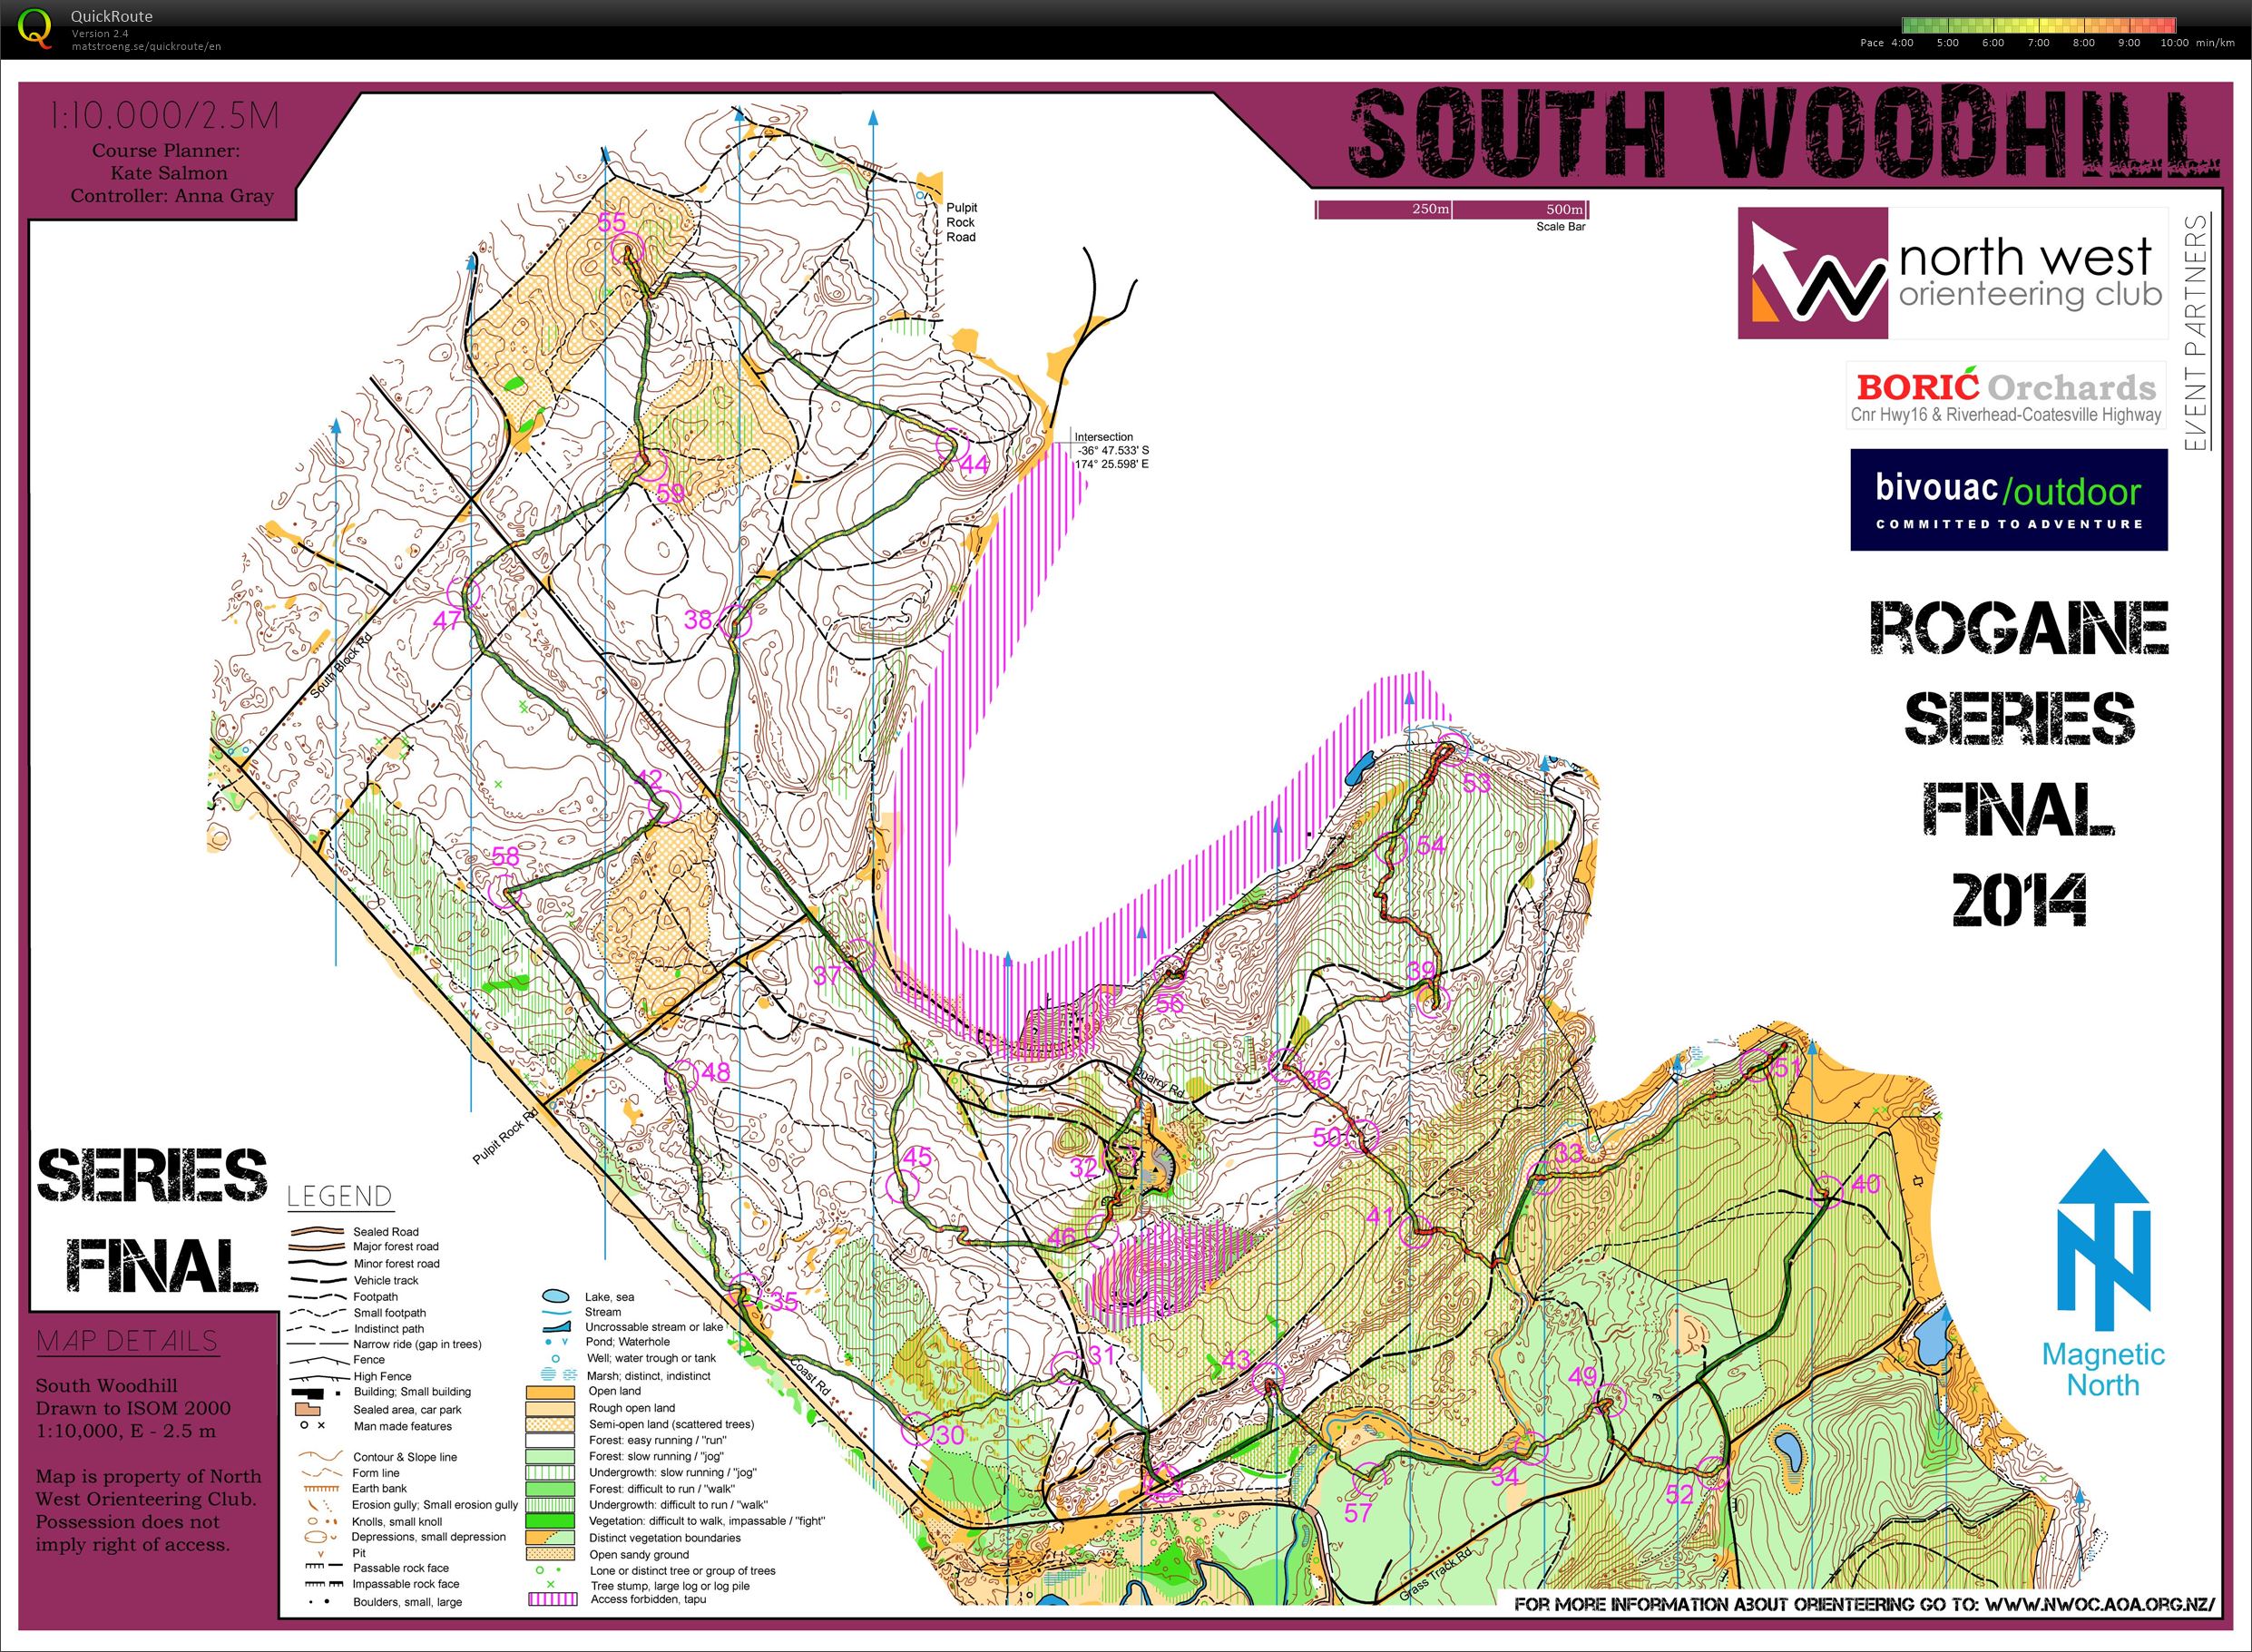 Rogaine Series - Part 4 - South Woodhill (08/06/2014)